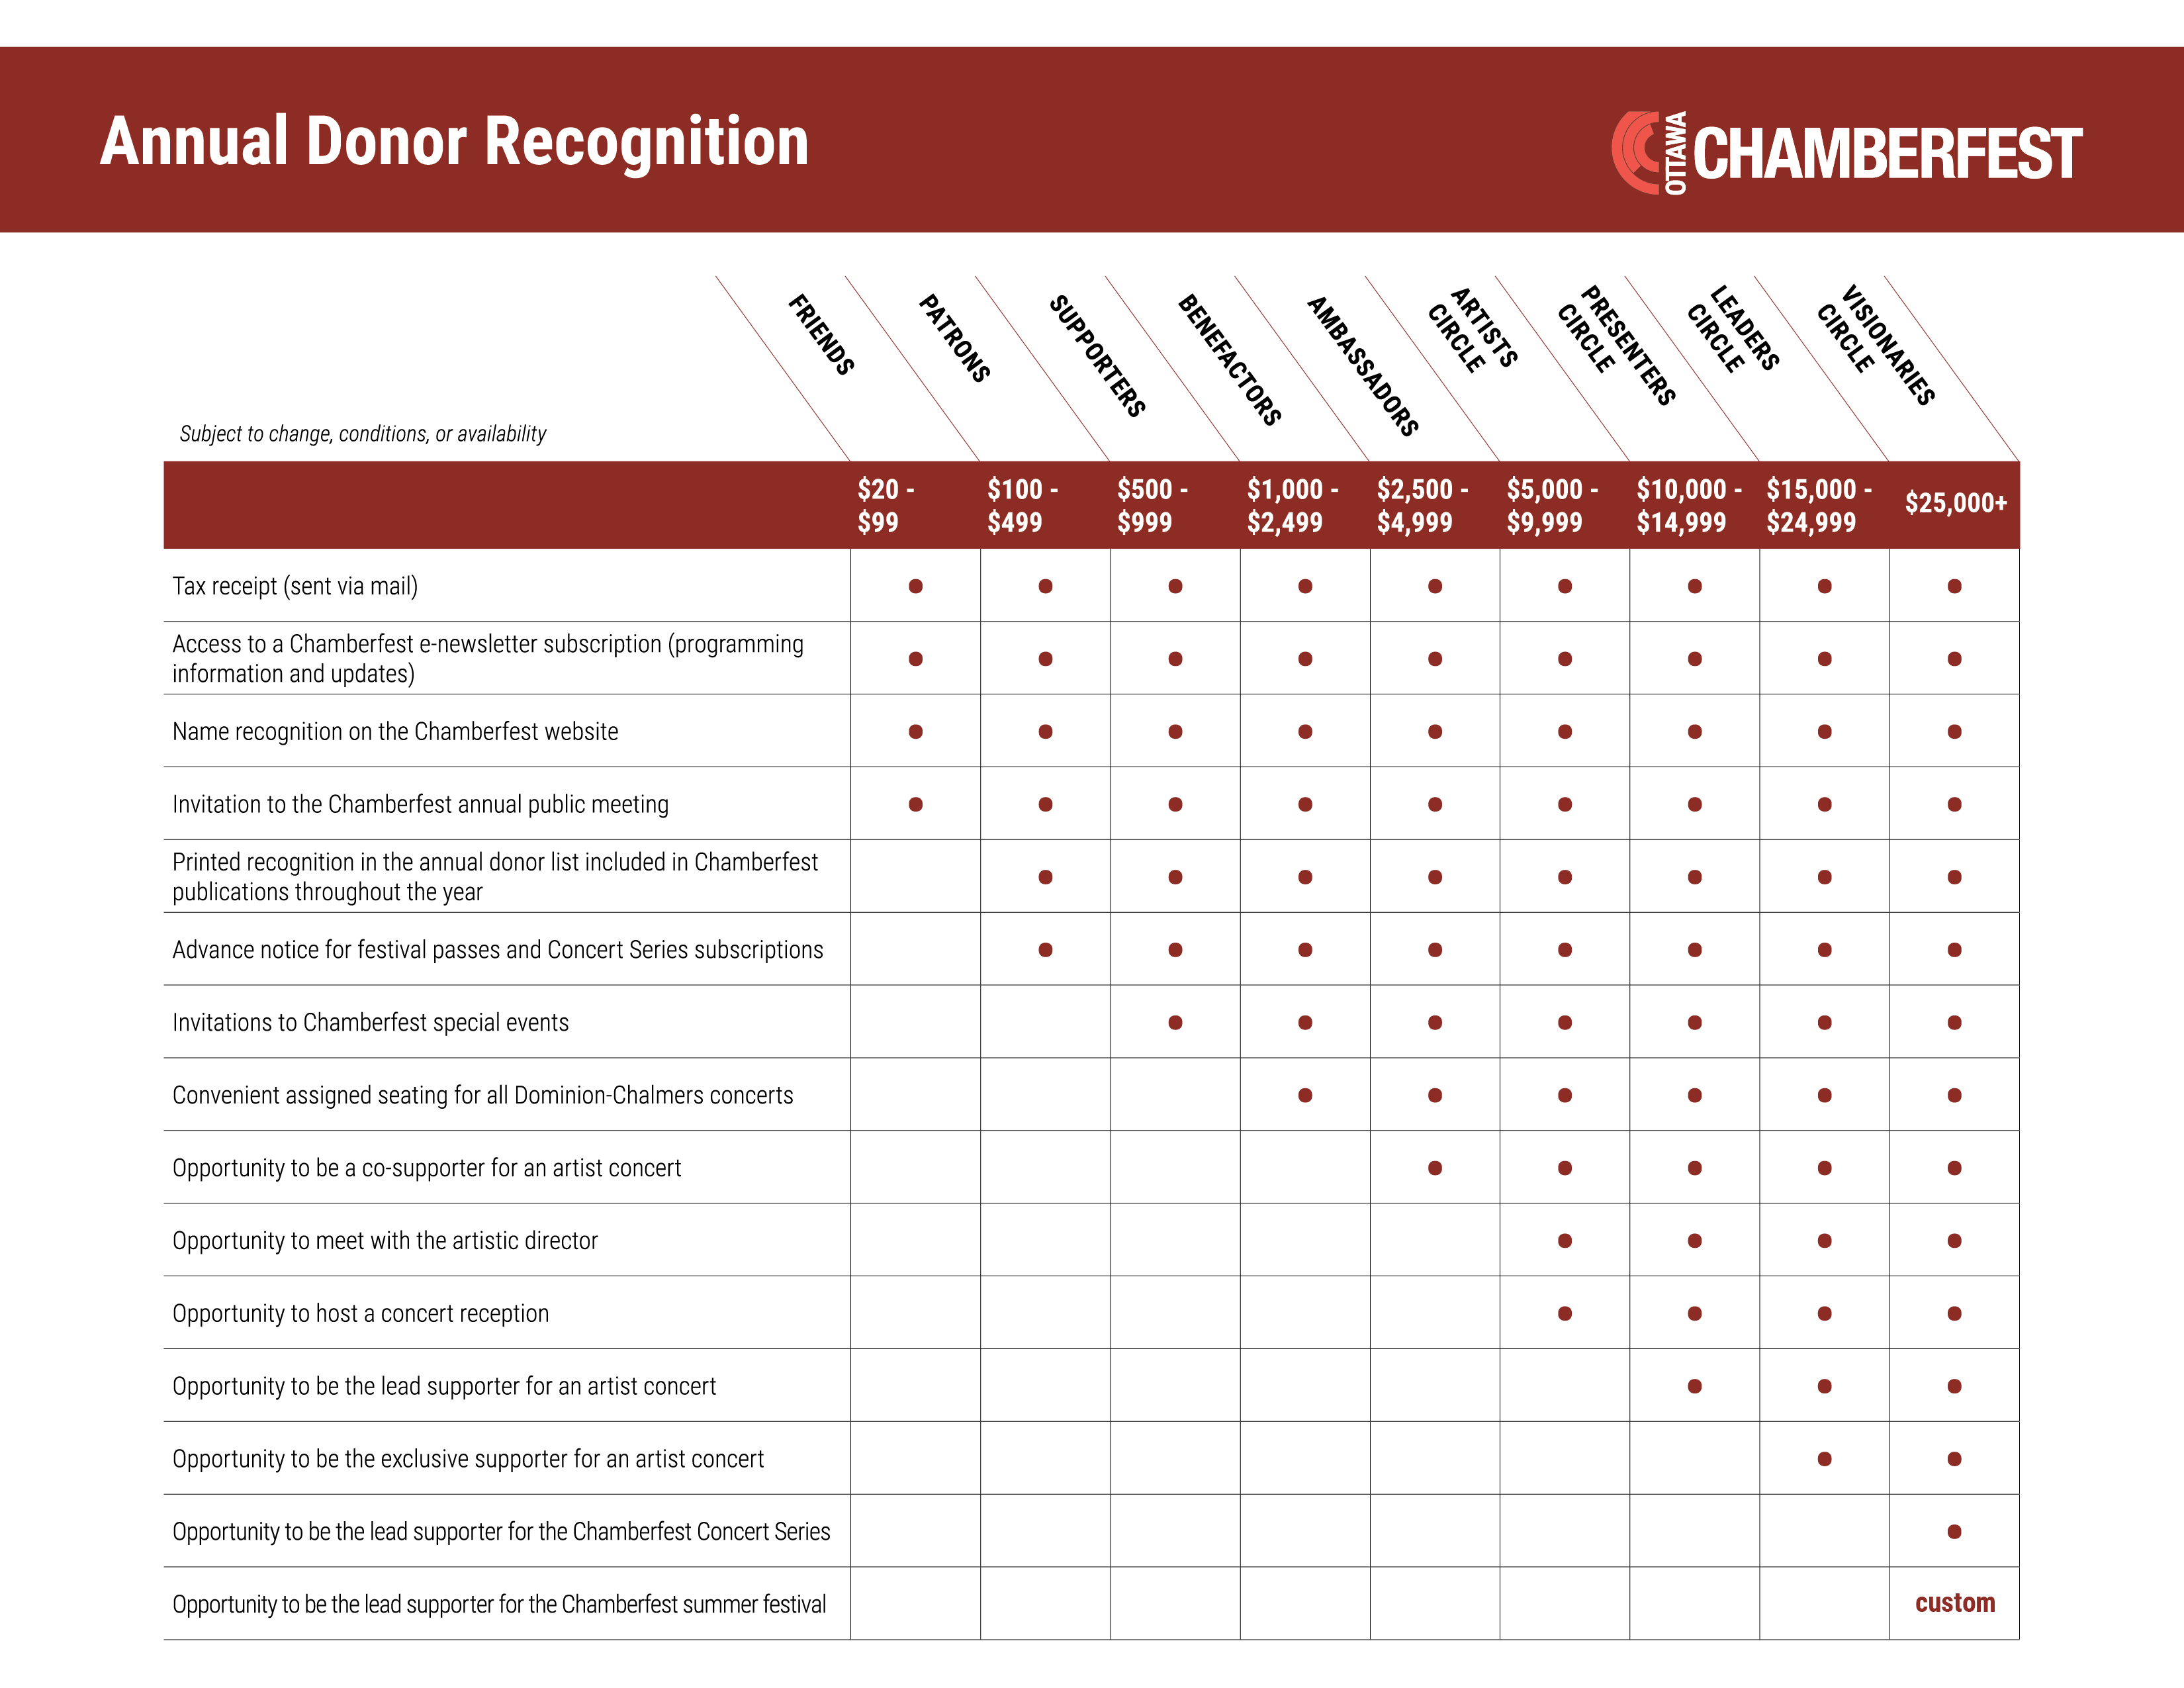 Annual Donor Recognition Chart